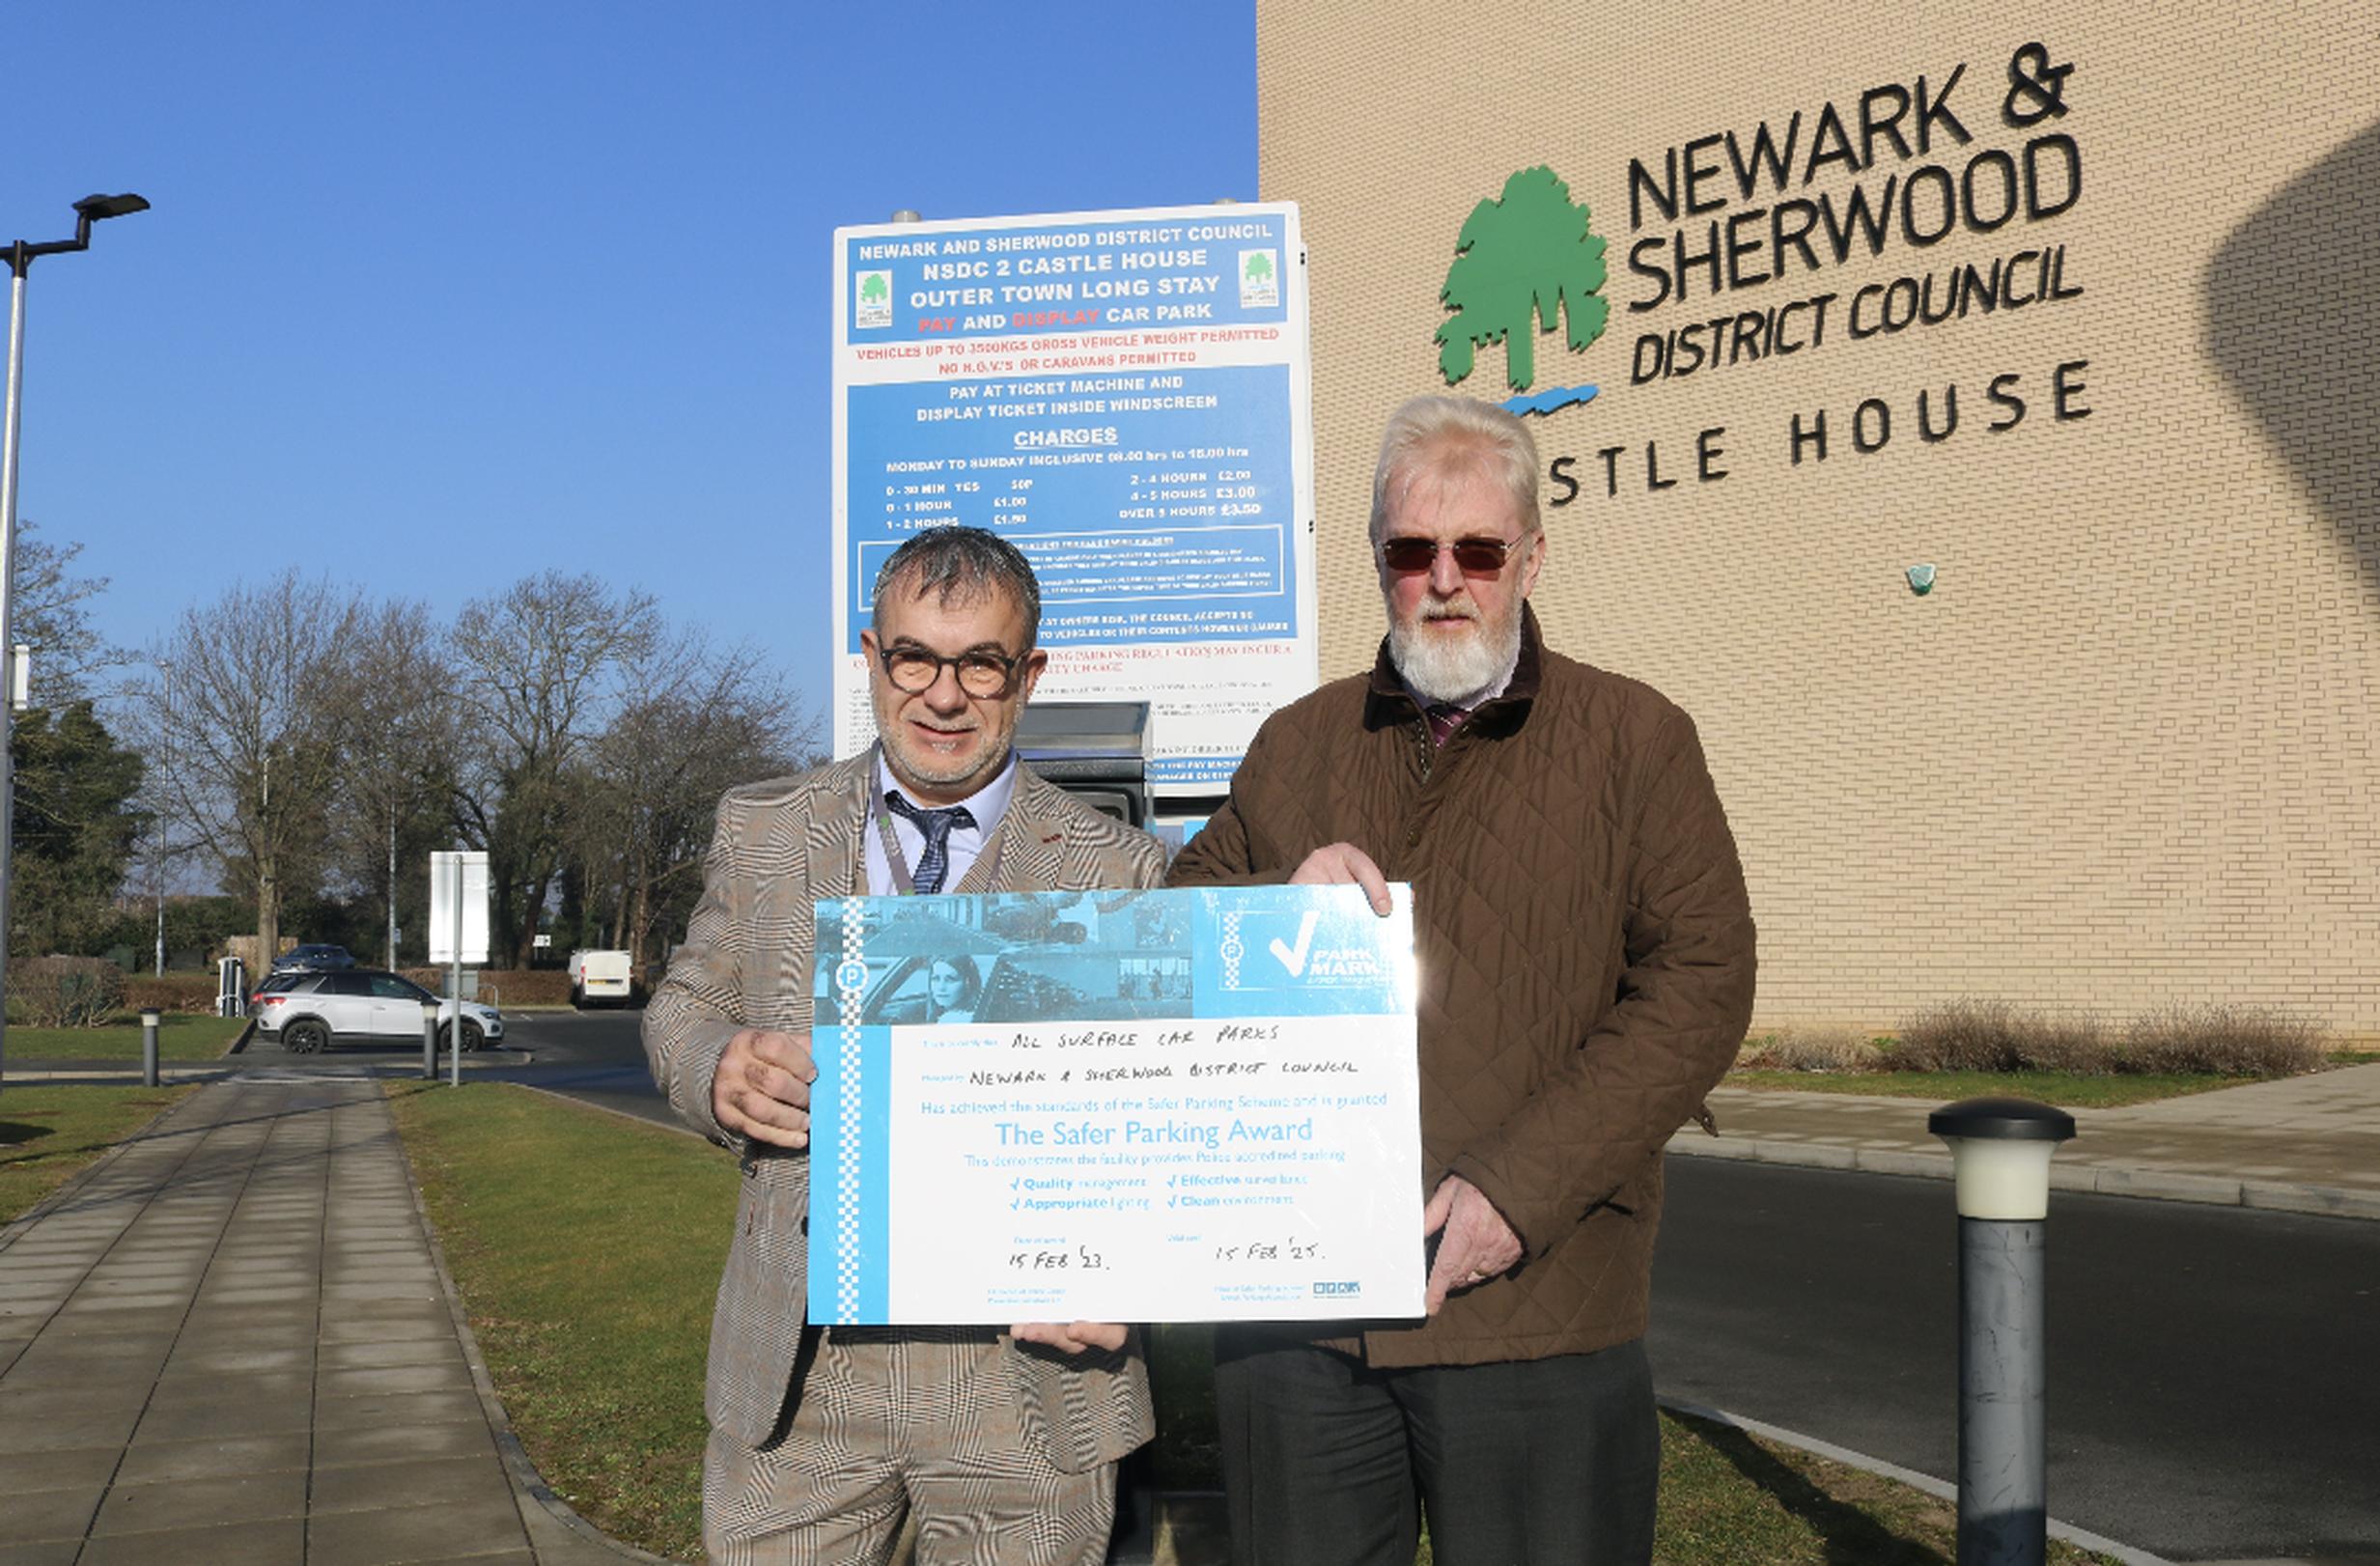 Hat-trick of Park Marks for Newark and Sherwood sites